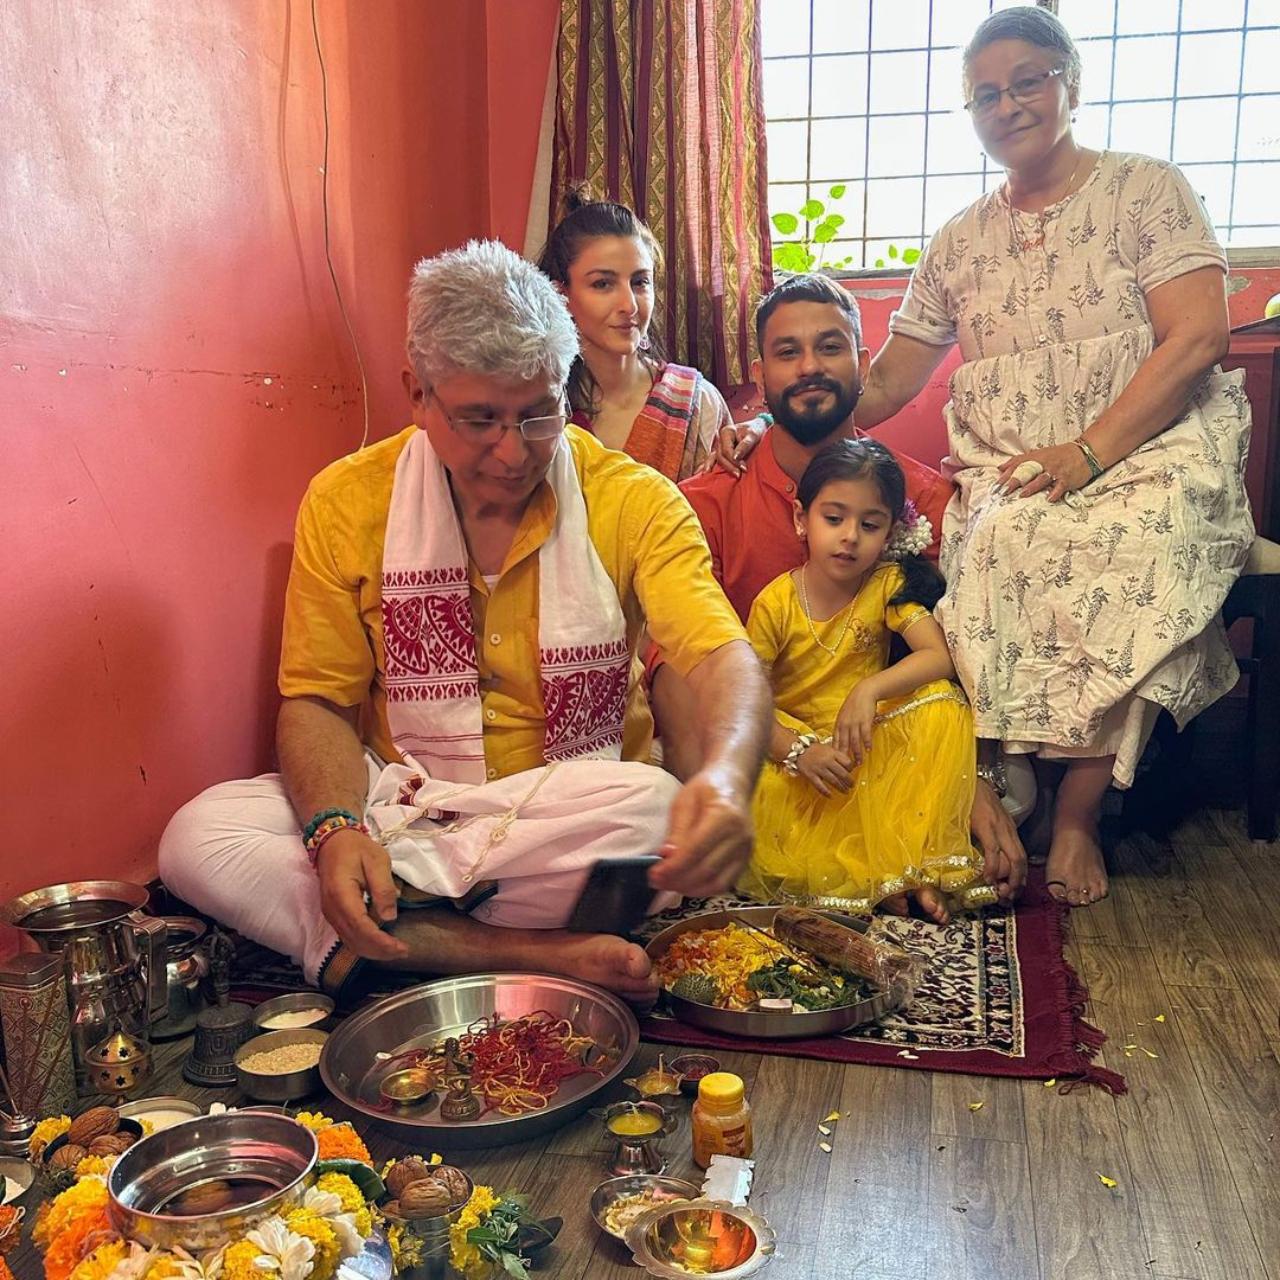 Kunal and Soha have also conscioulsy instilled Indian traditions and culture in their daughter. The couple who are interfaith follow customs of both religions at home and share pictures of them celebrating all festivals